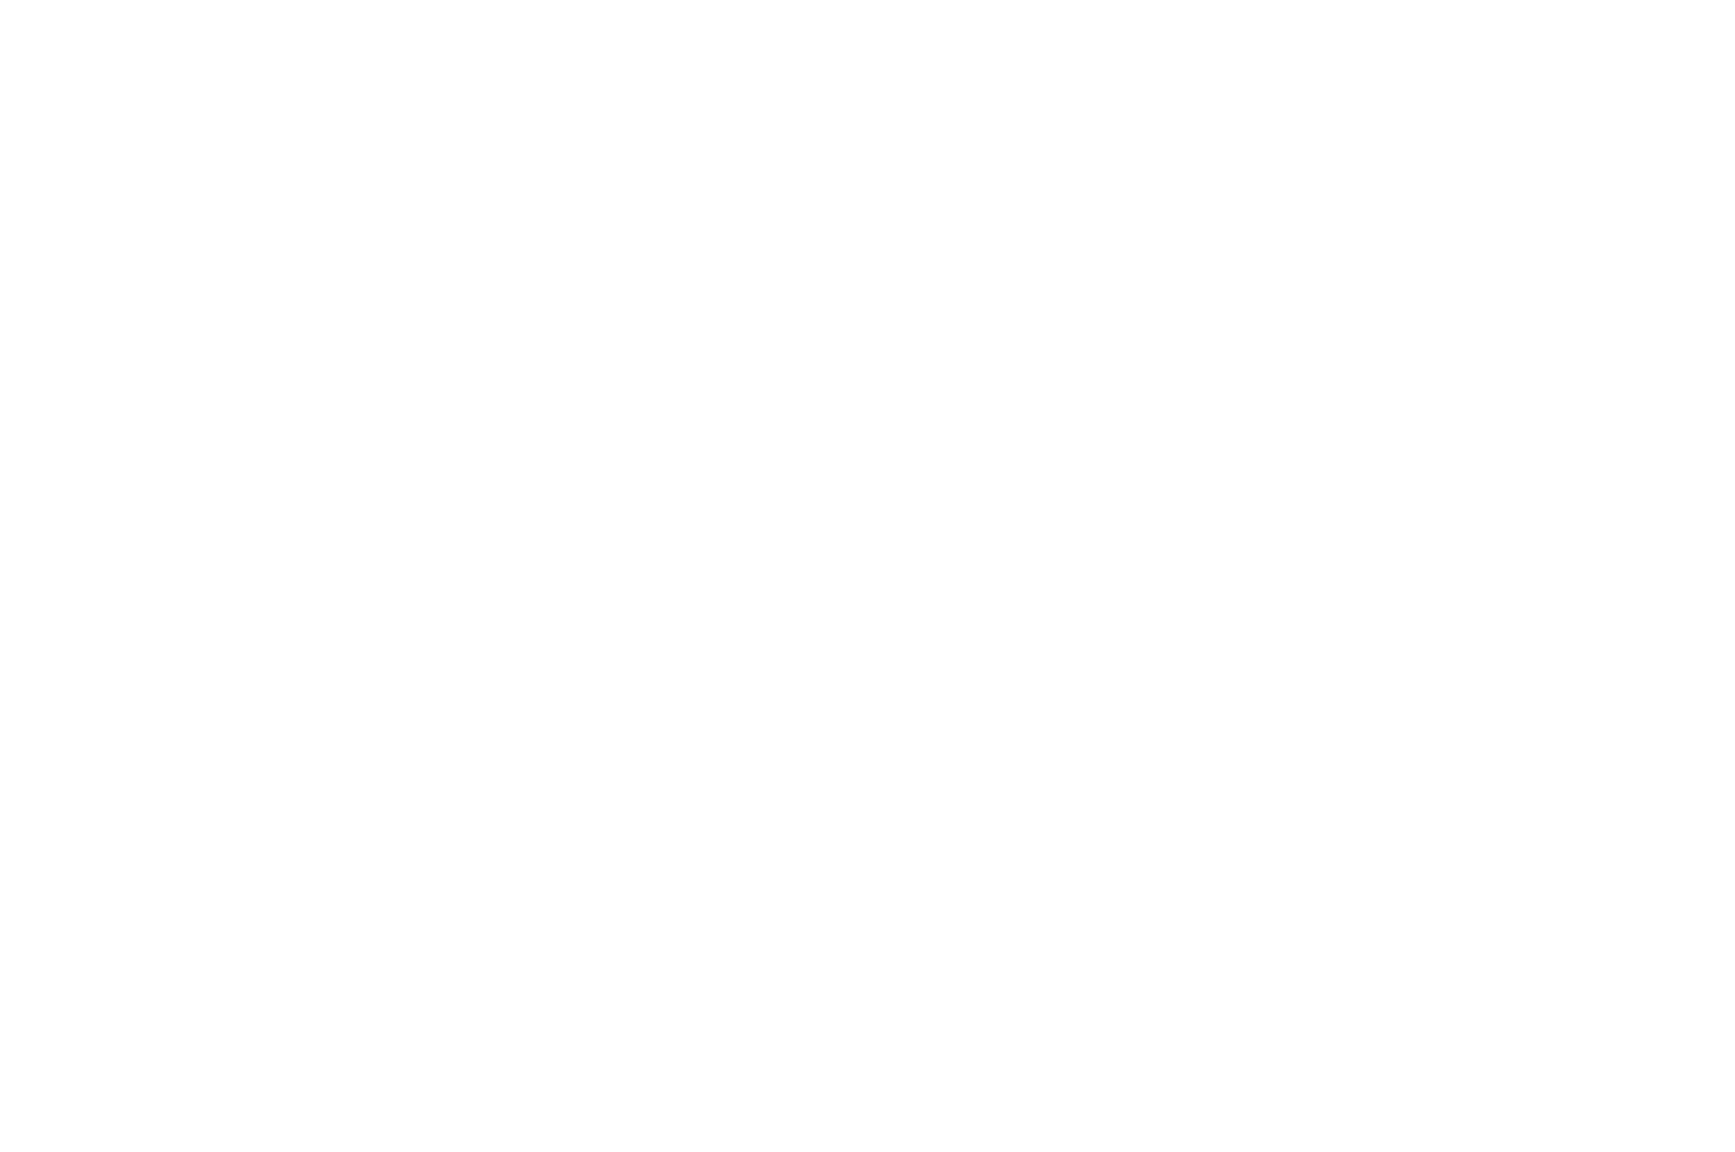 OFFICIAL SELECTION - WCAIFF Festival - 2022